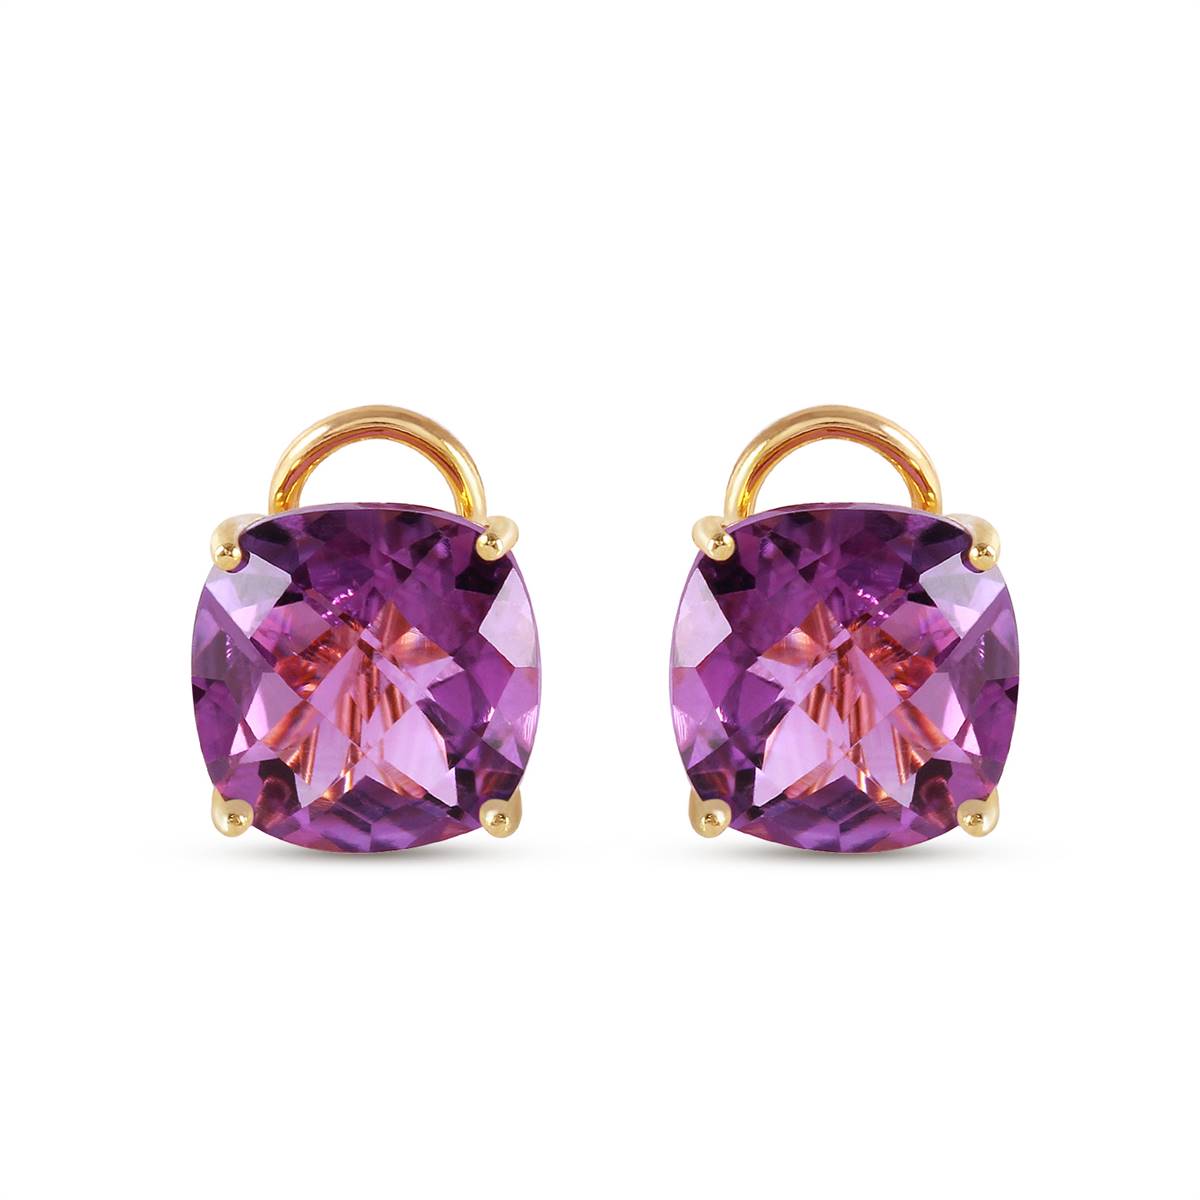 7.2 Carat 14K Solid Yellow Gold Provocative Amethyst Earrings